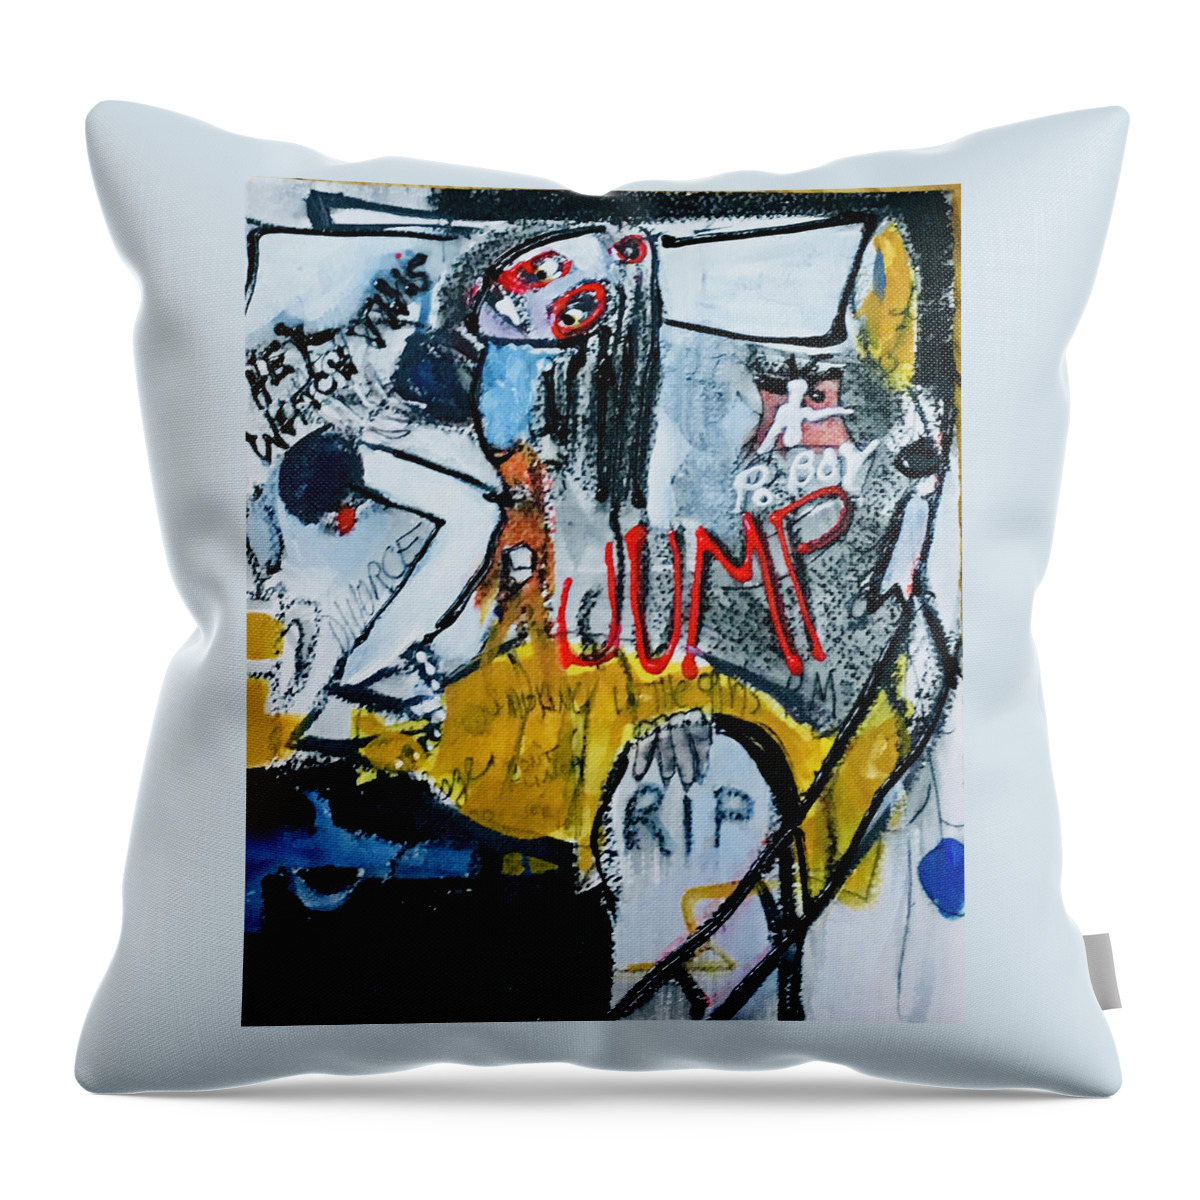 Contemporary Throw Pillow featuring the painting Po Boy by Carole Johnson